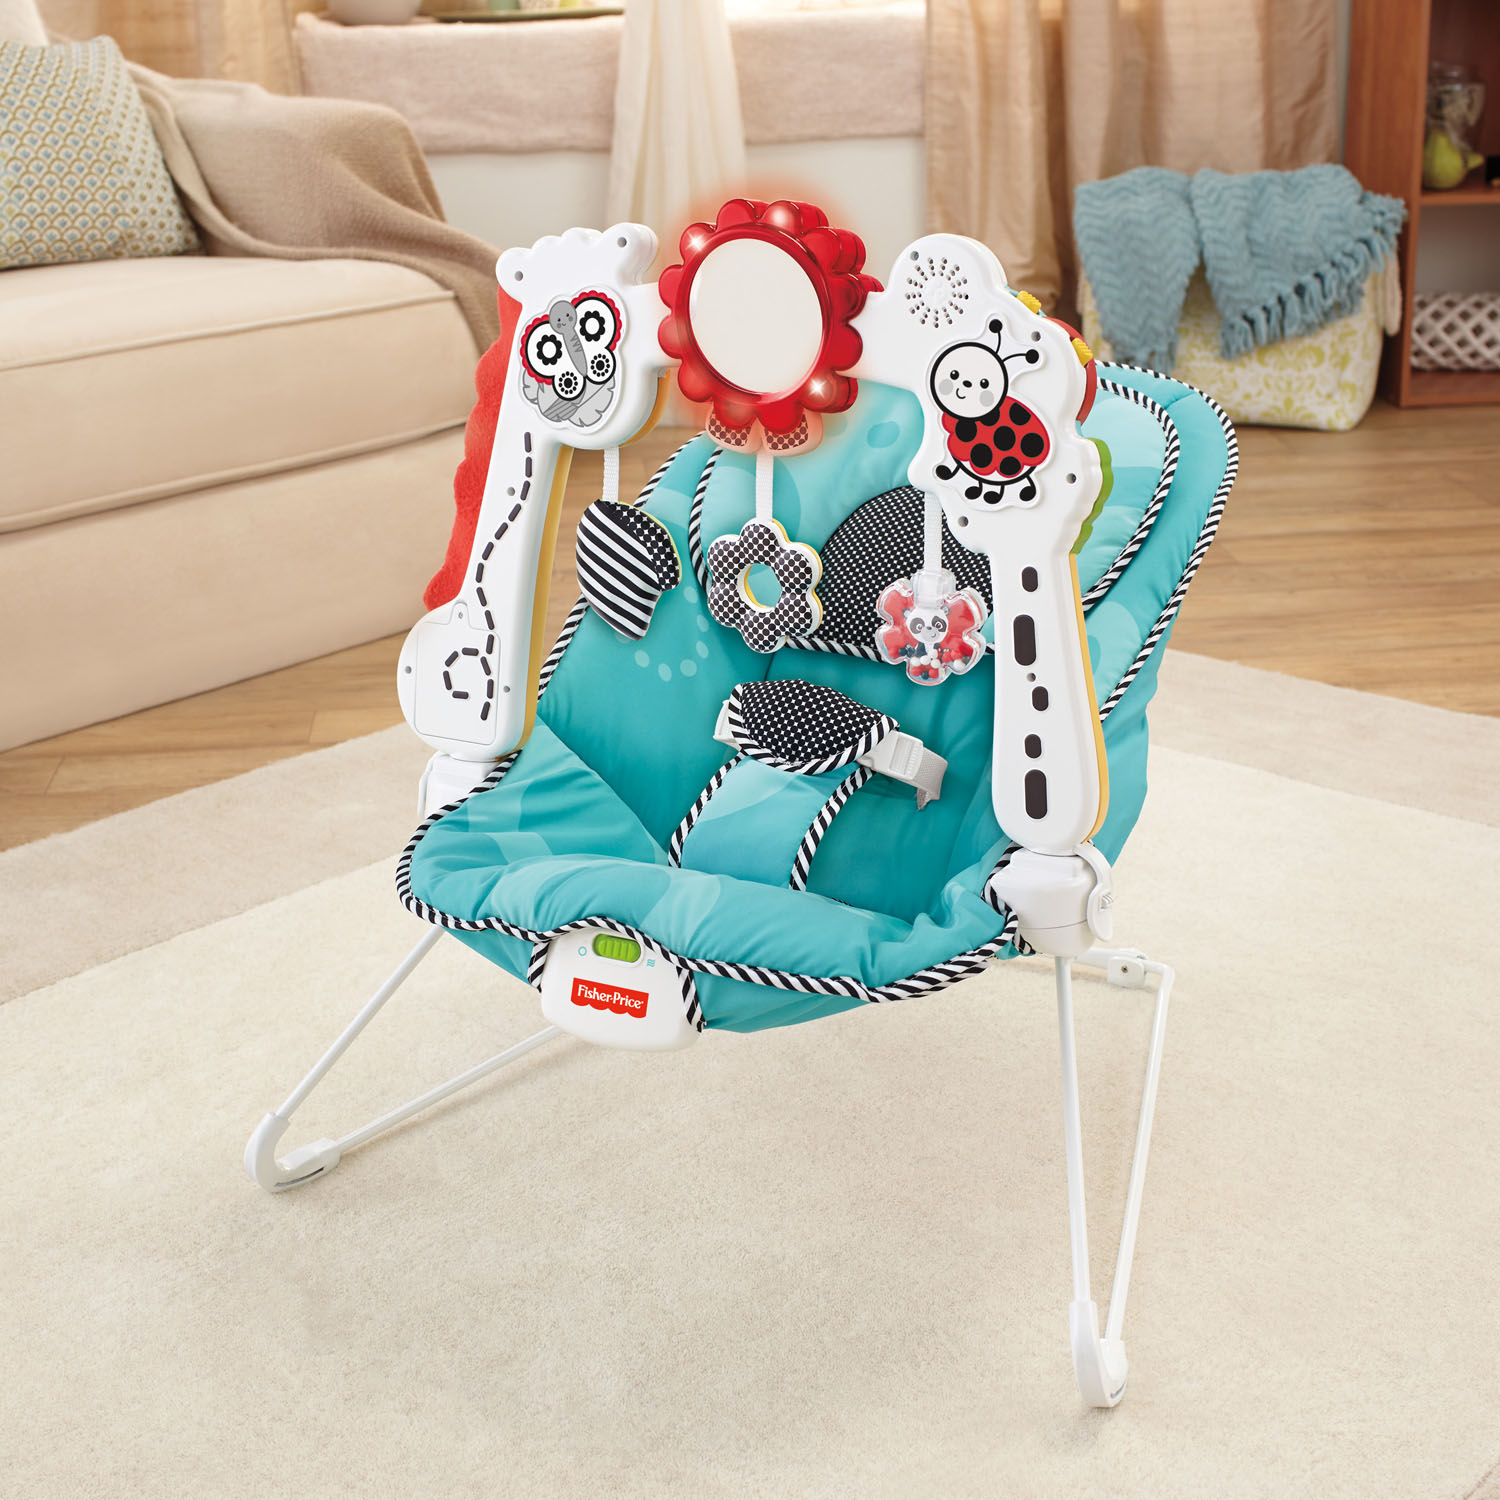 _Fisher_Price_Two_in_One_Sensory_Stages_Bouncer_2015_1